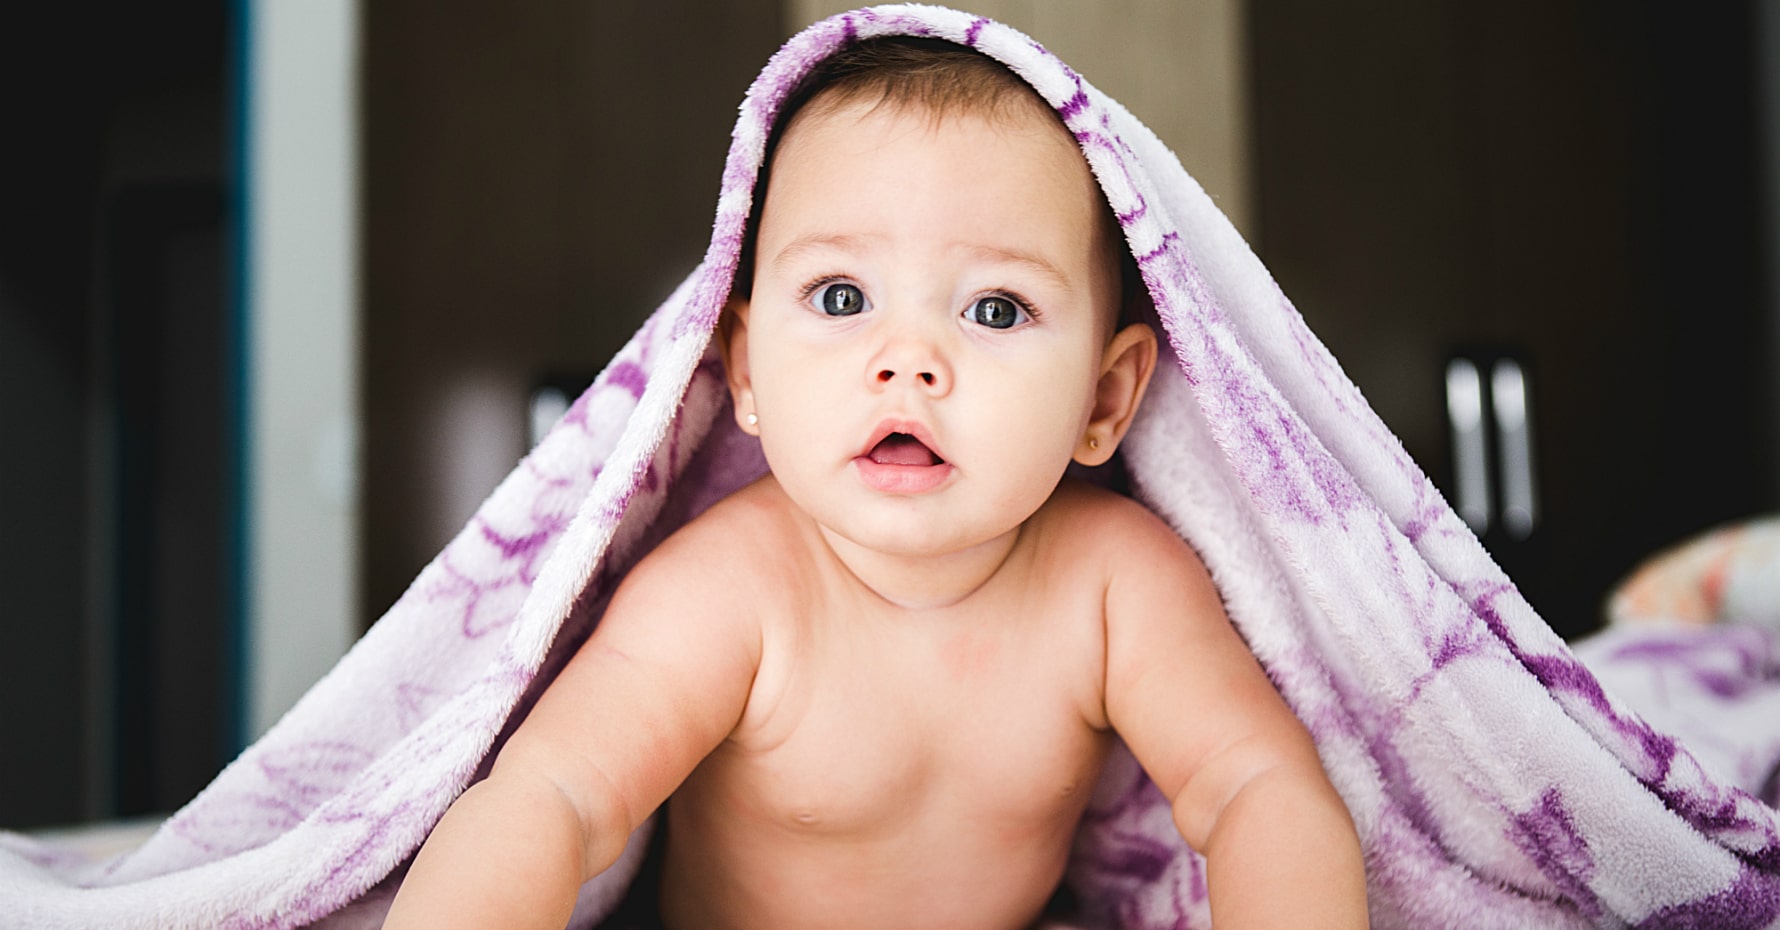 image of little baby after shower